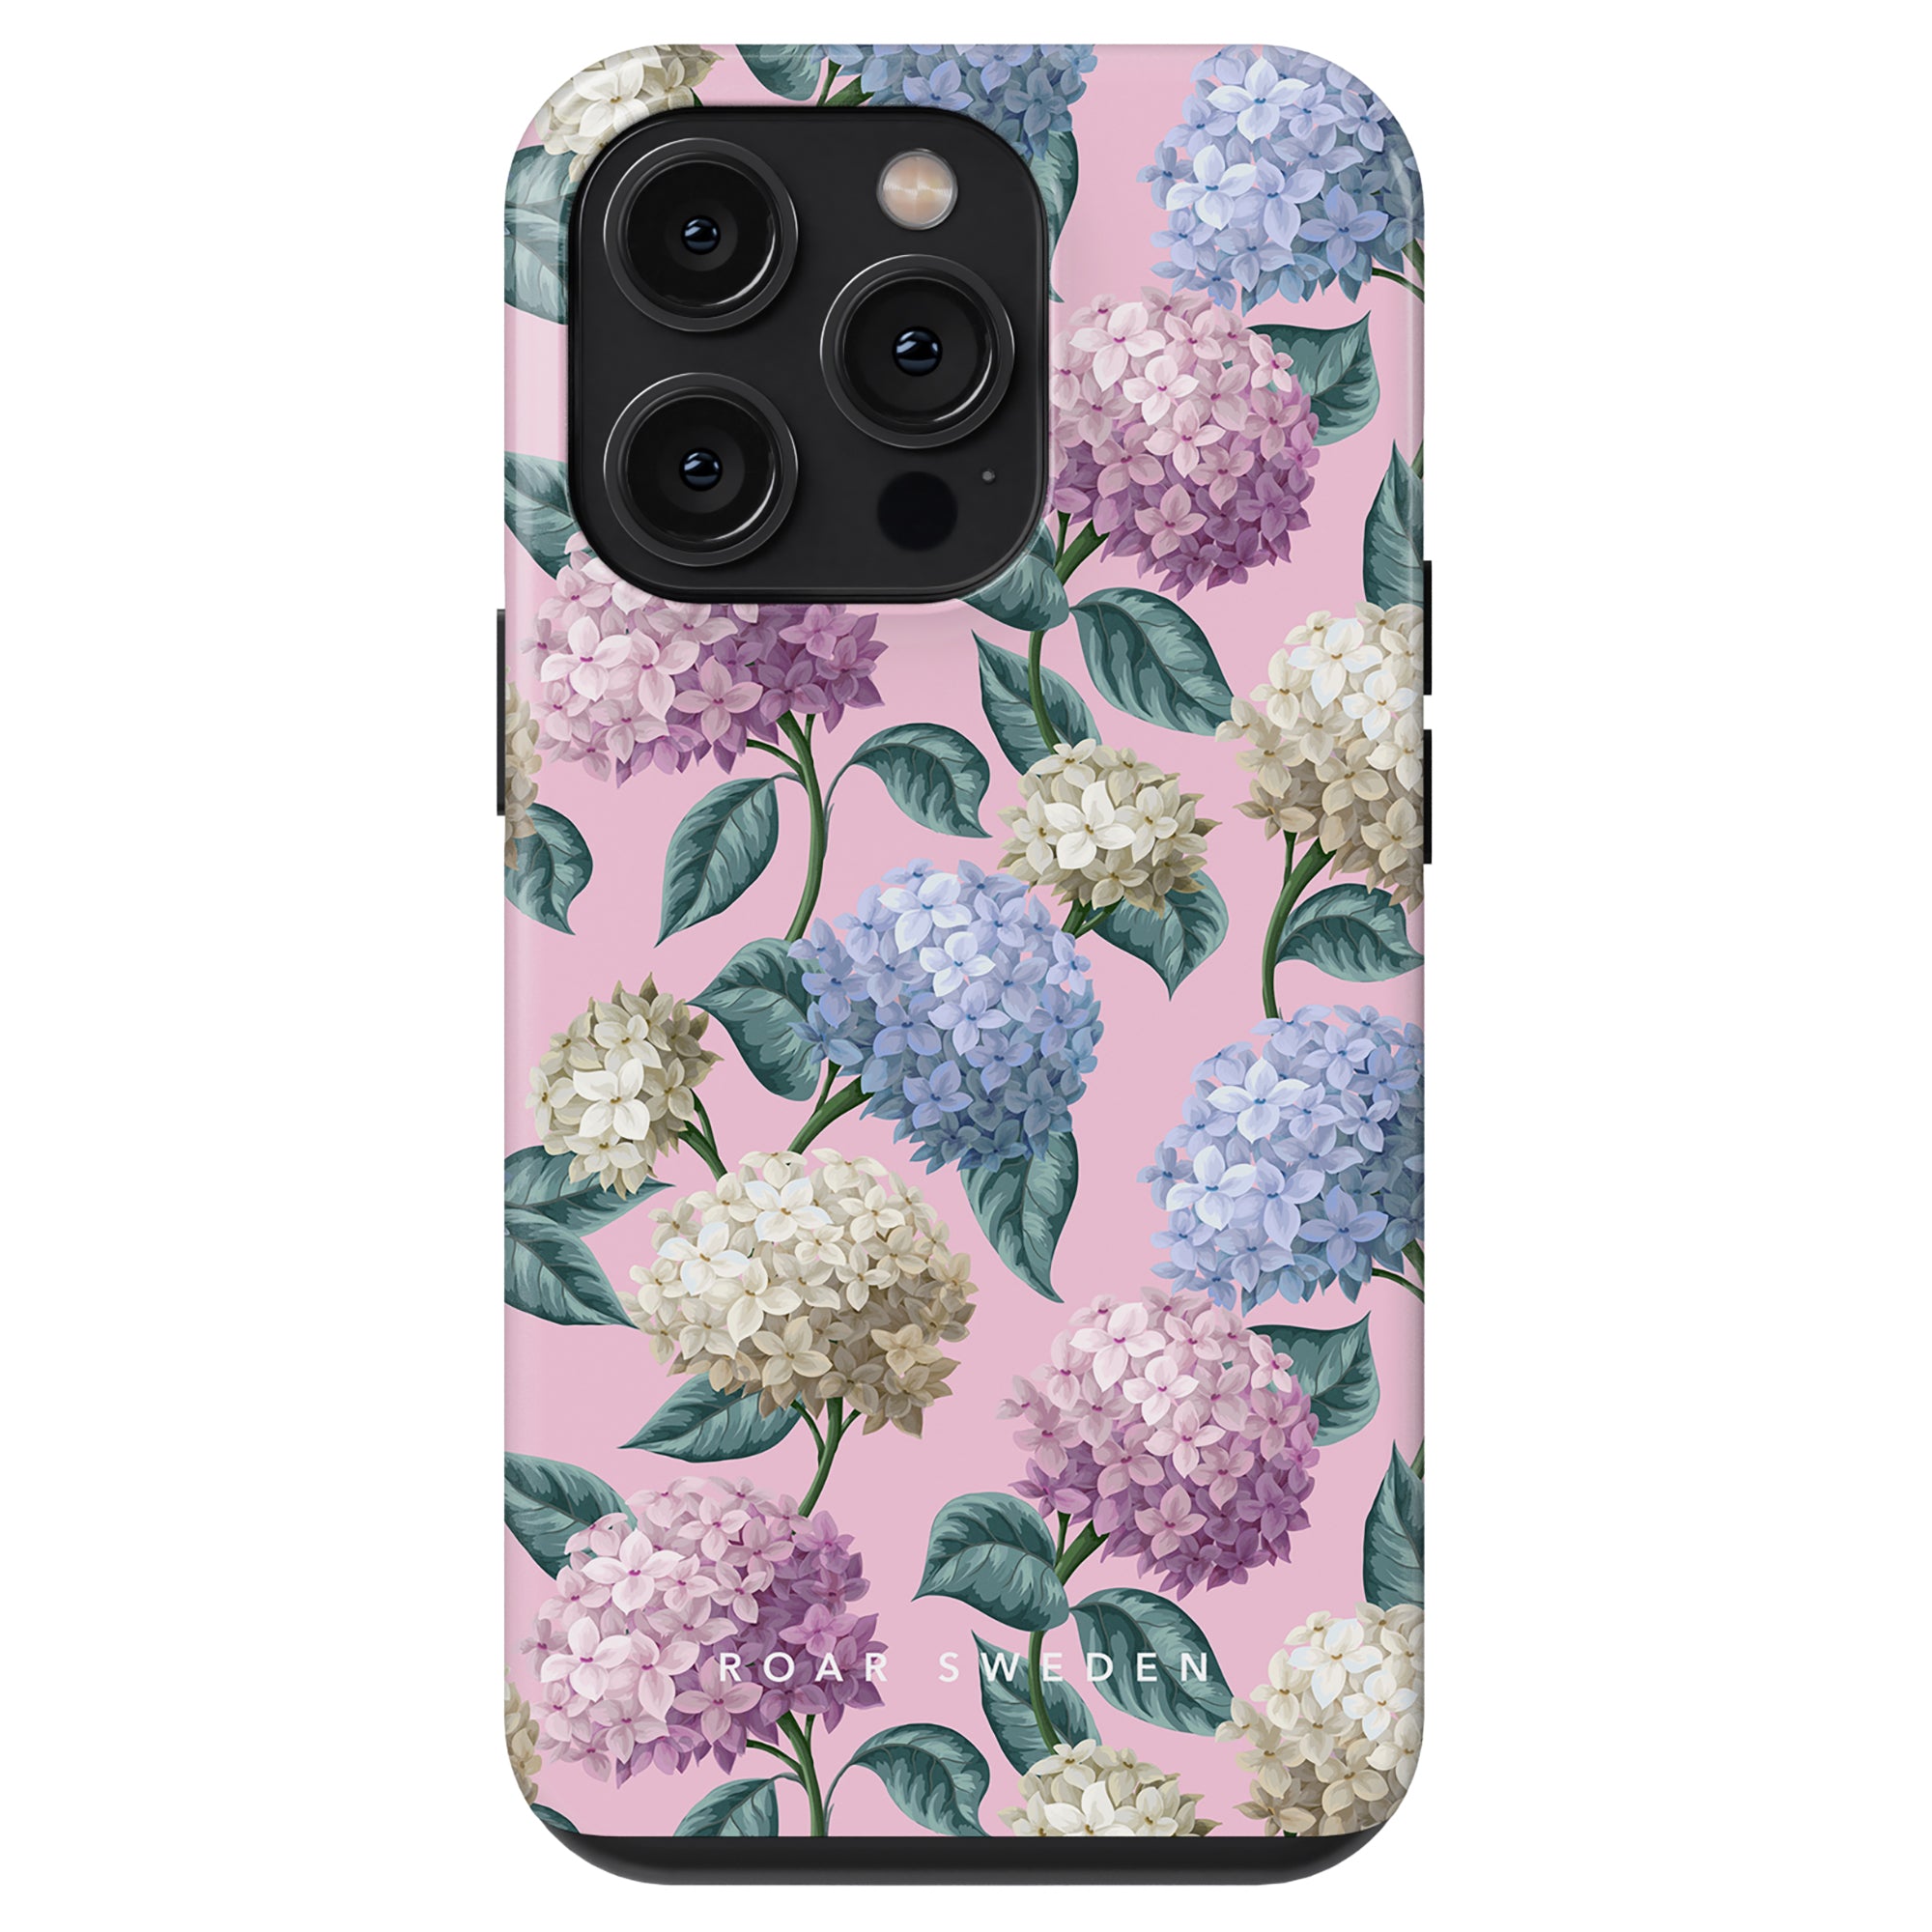 A Hydrangea - Tough Case featuring a pink background with a floral pattern of multicolored hydrangeas and green leaves. The text "ROAR SWEDEN" is visible at the bottom, from the Summer Collection, offering both style and smartphone protection.